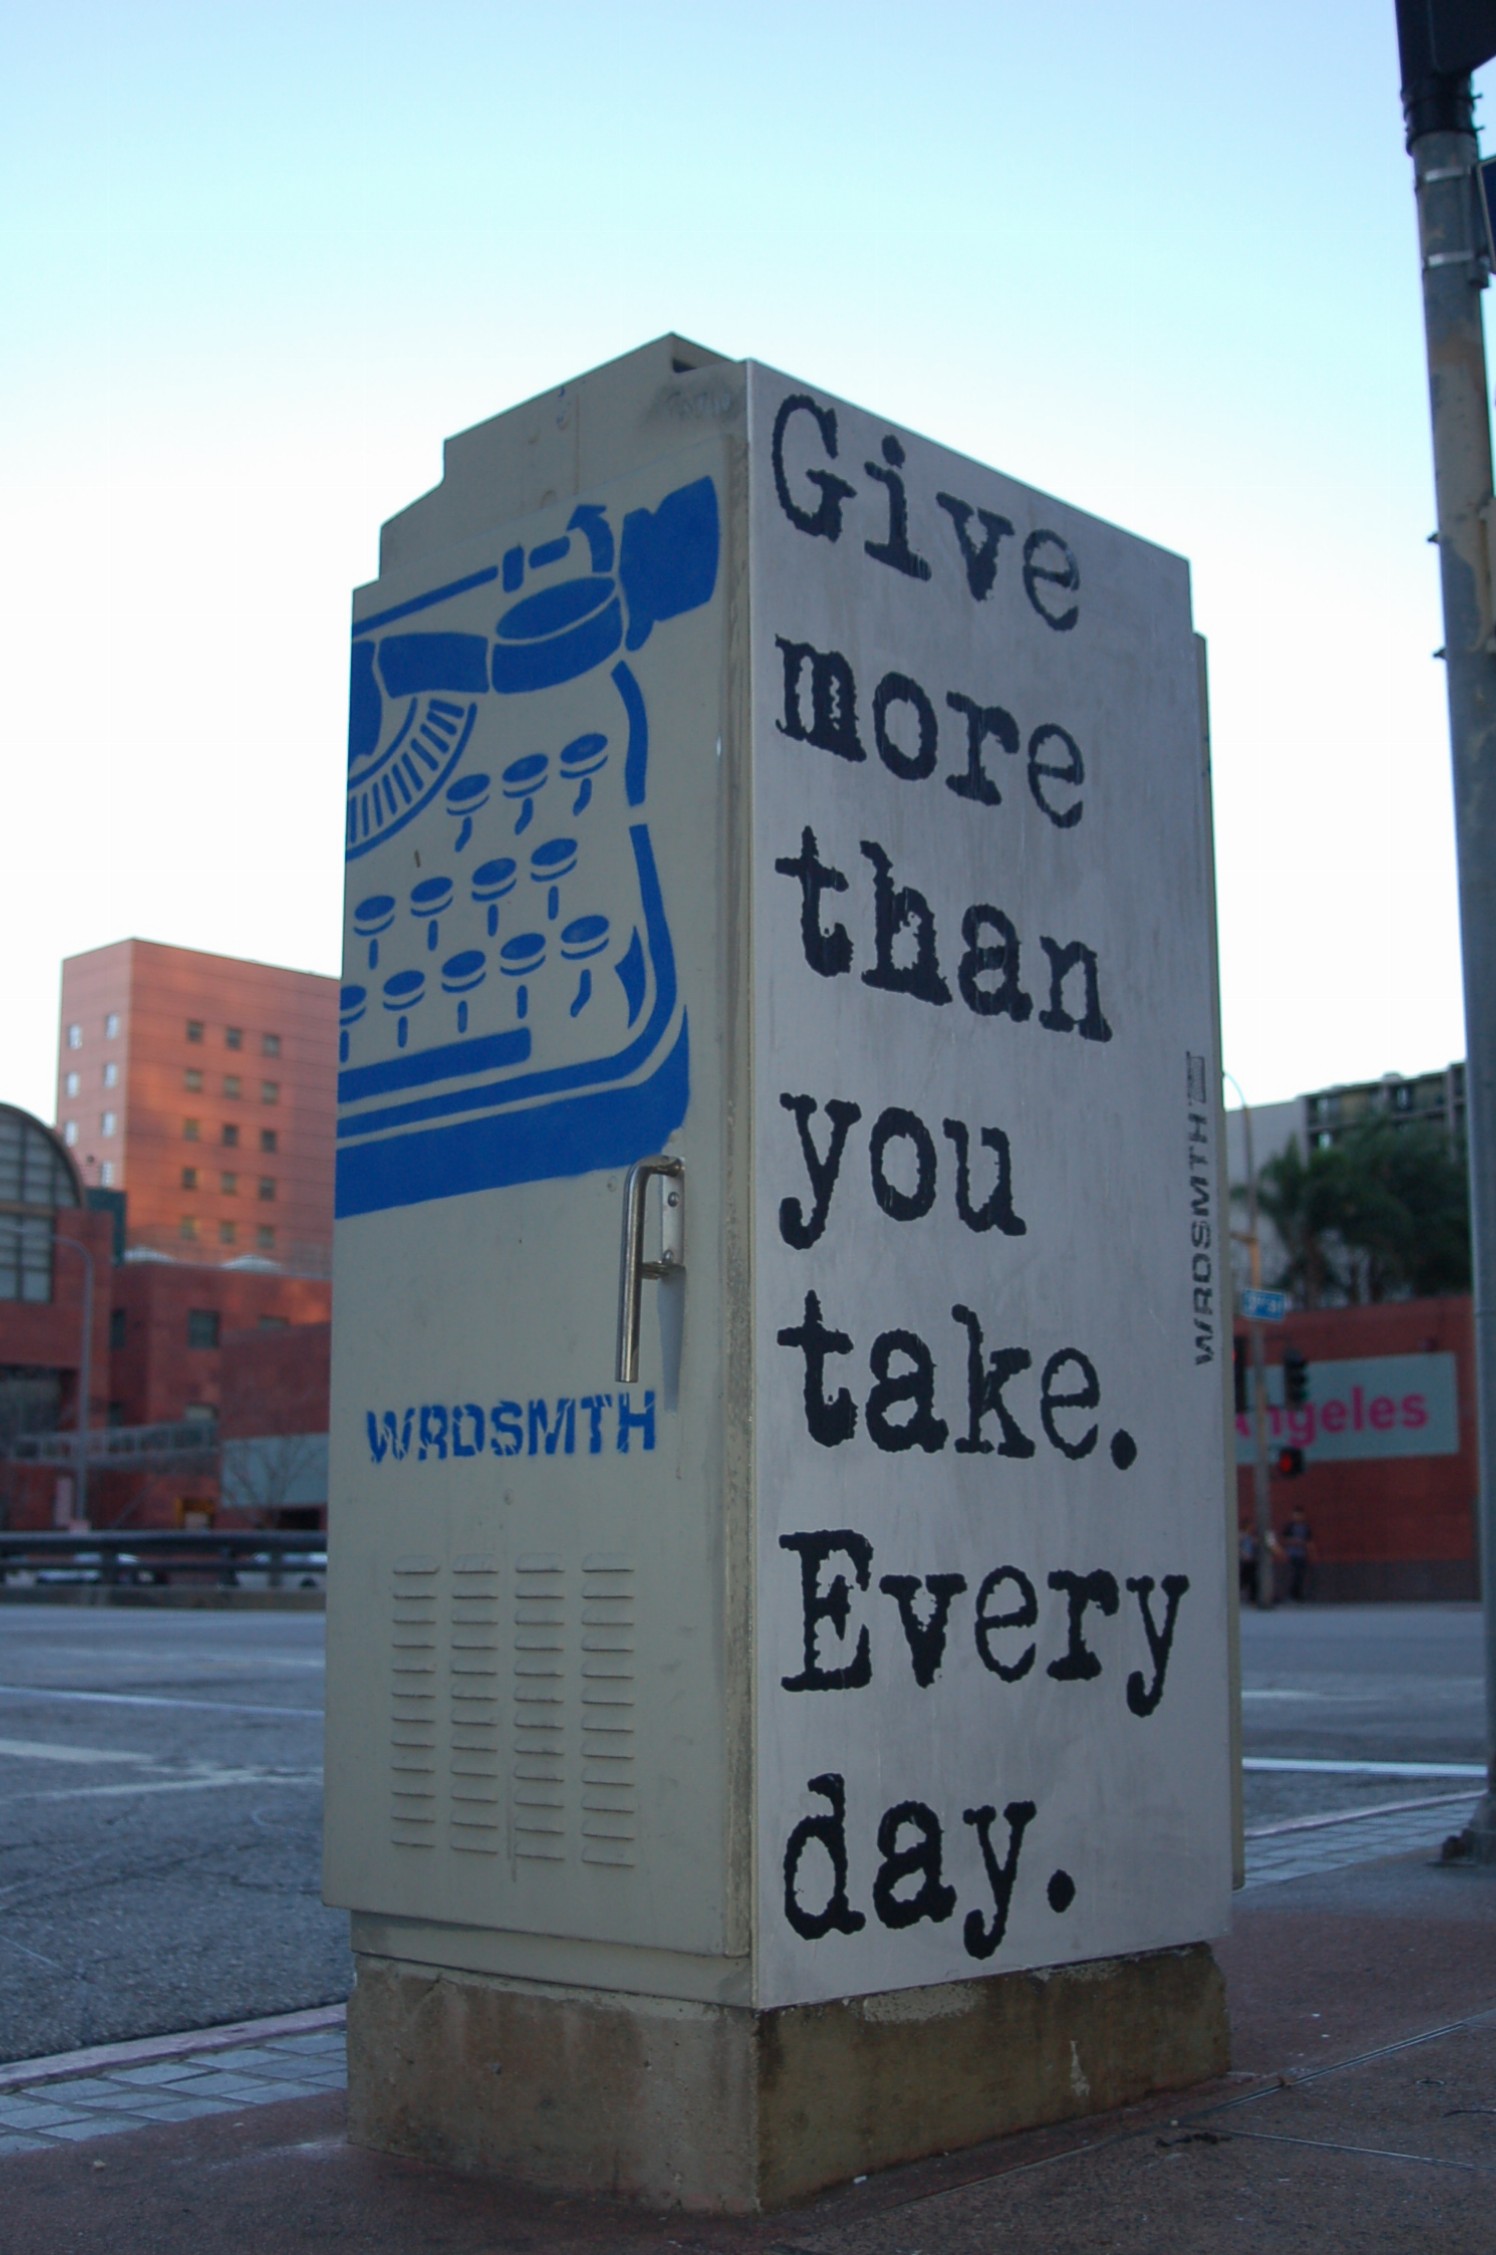 give more